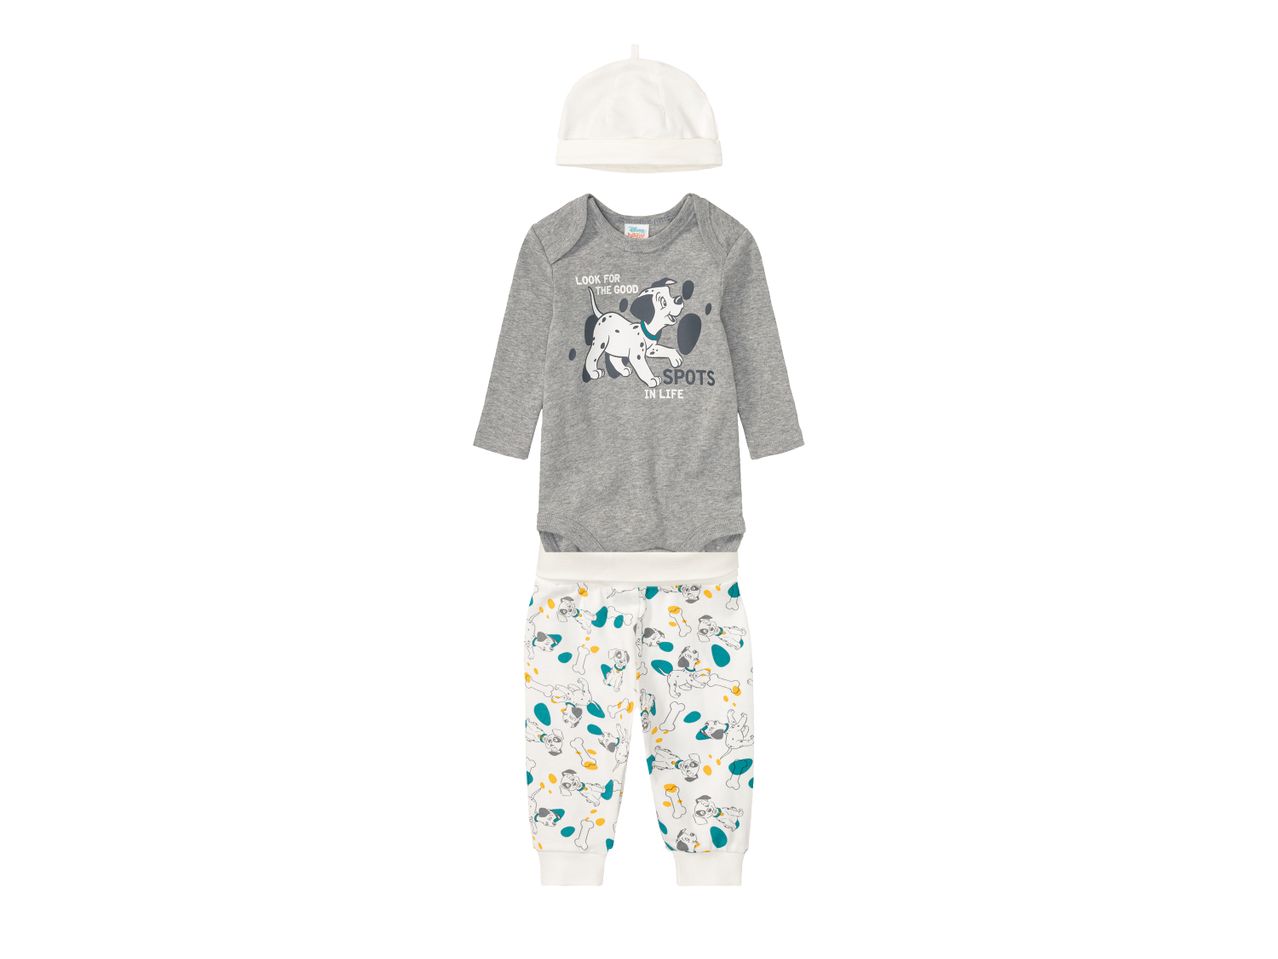 Go to full screen view: Babies’ Outfit “Disney" - Image 2